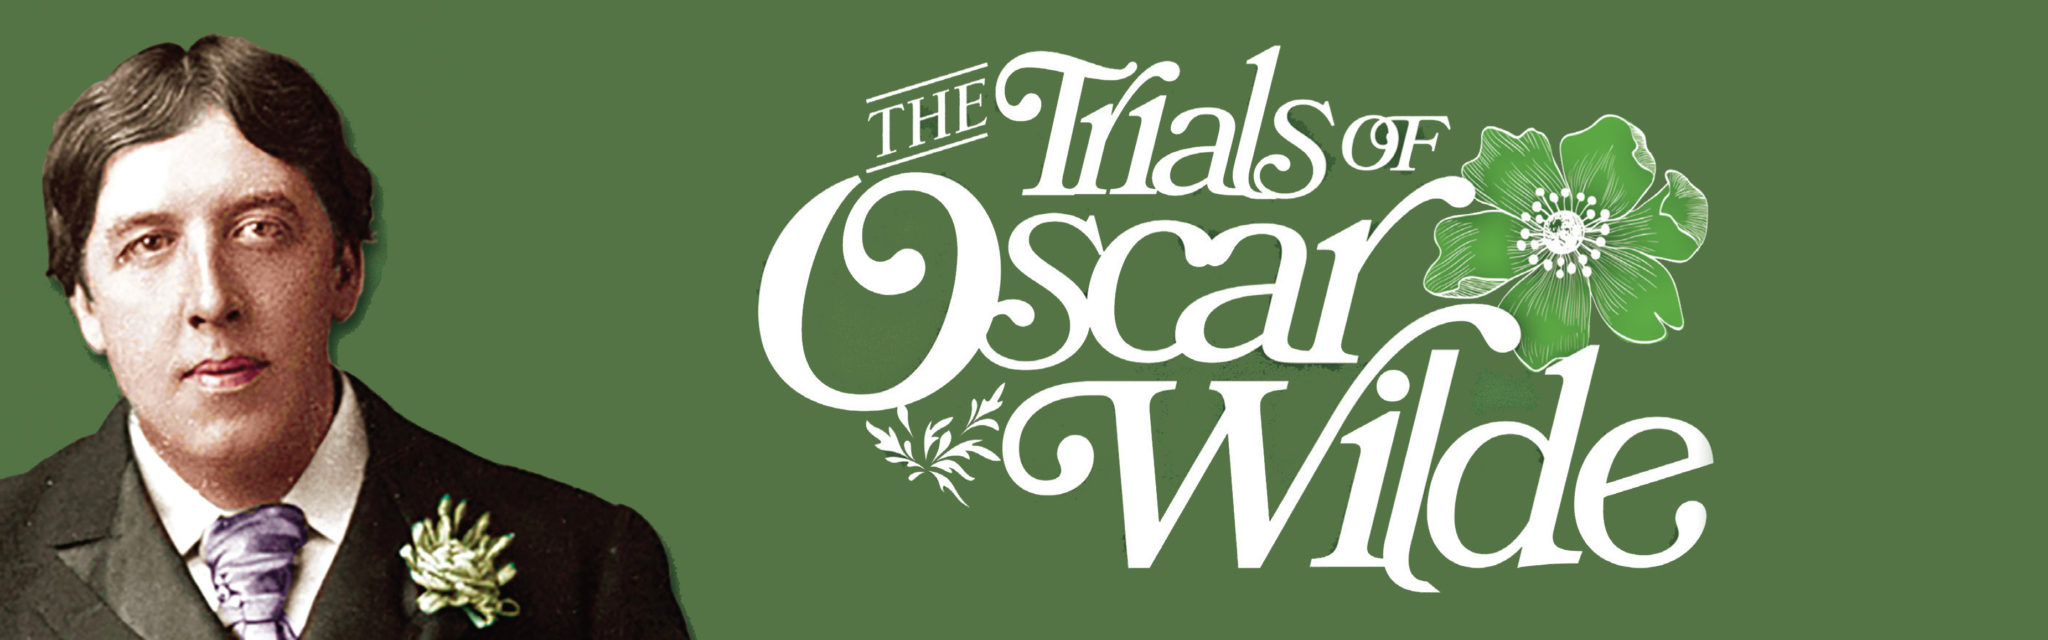 The Trials of Oscar Wilde at the Greenwich Theatre